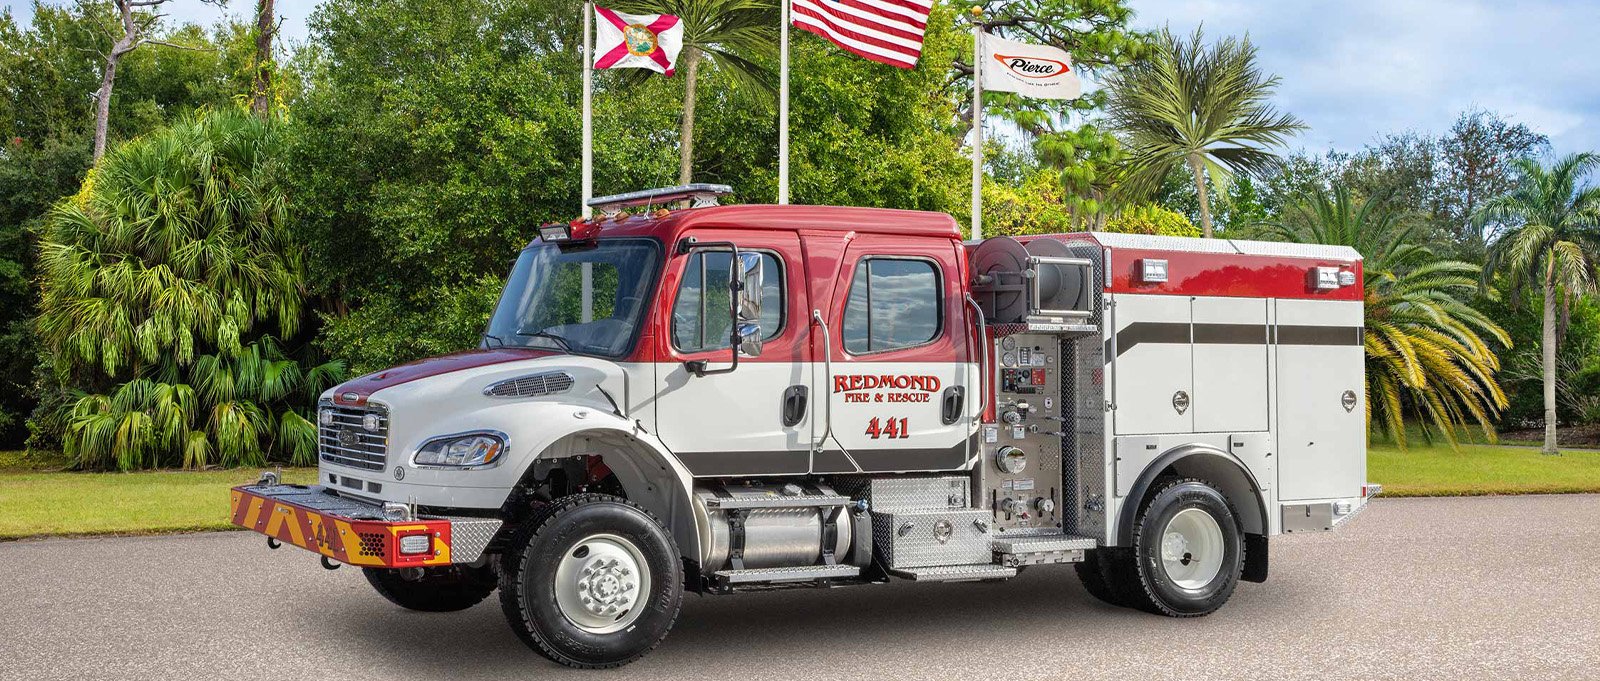 The white and red Redmond Fire & Rescue wildland pumper fire truck is parked on asphalt with flags and trees in the background. 